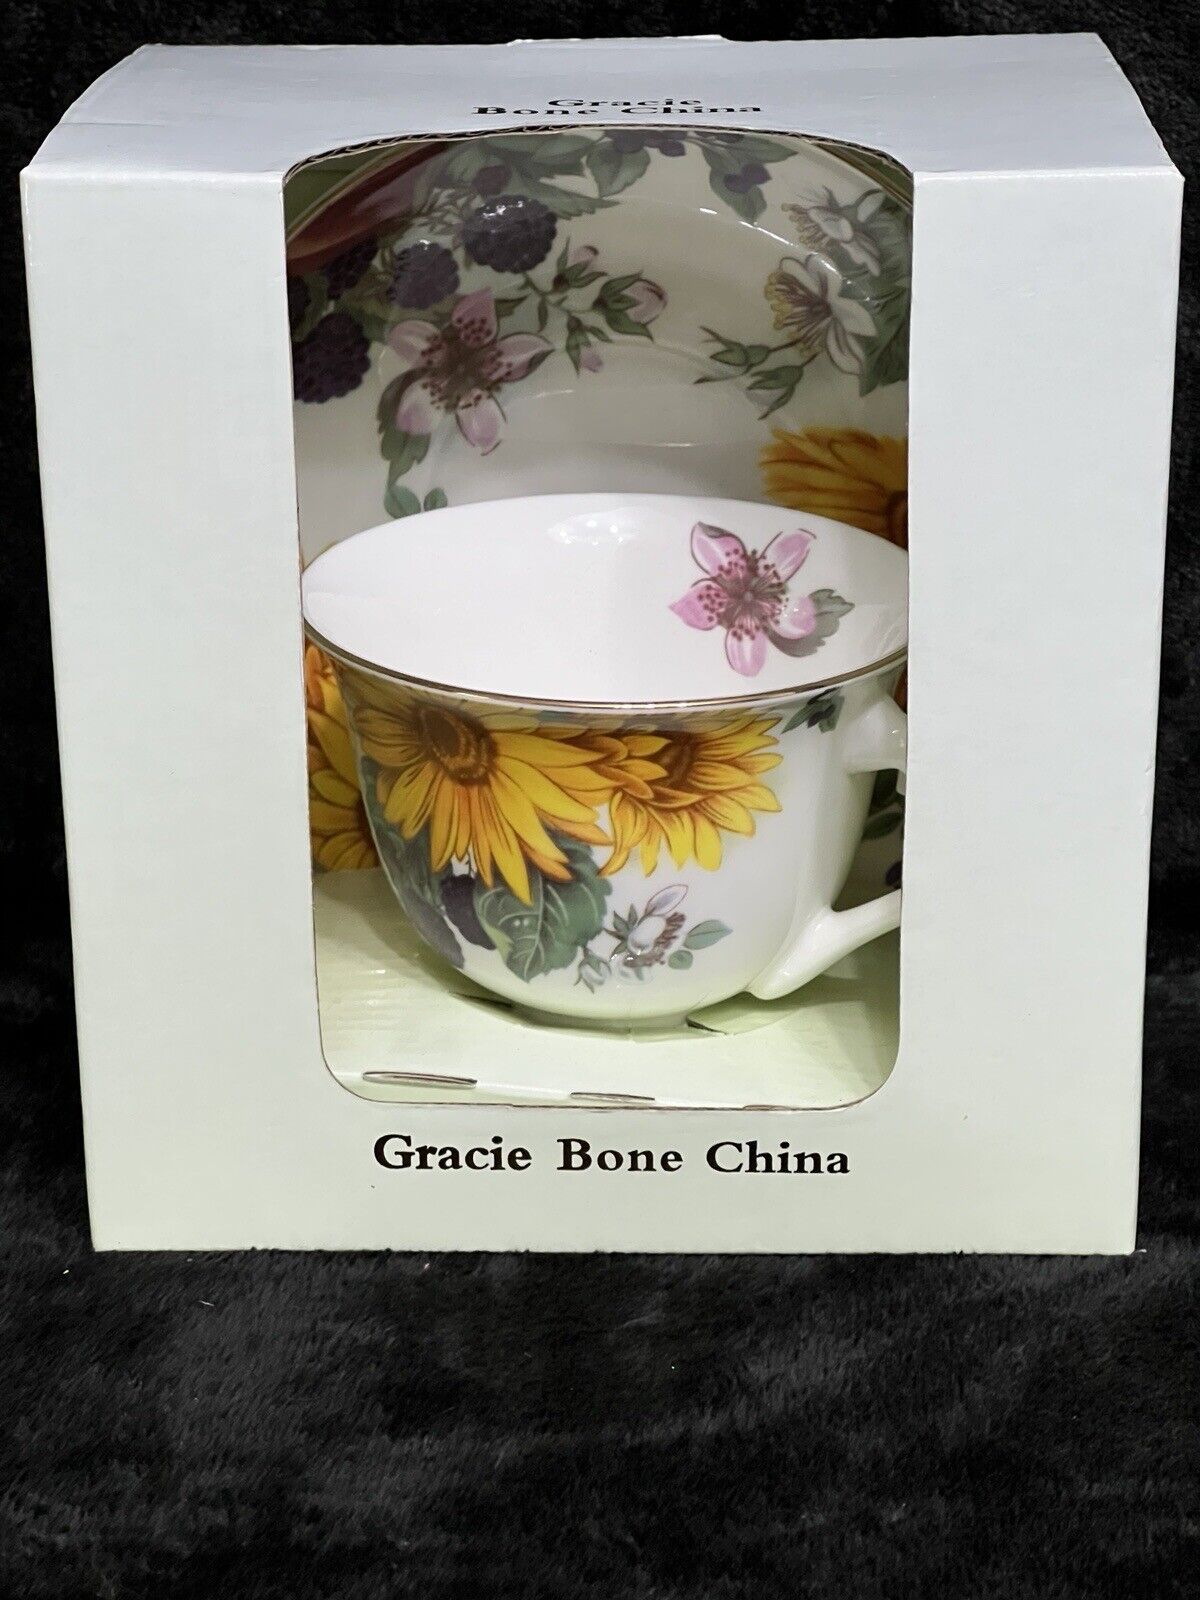 Gracie Bone China Coastline Imports Large Sunflower Teacup and Saucer NEW In Box